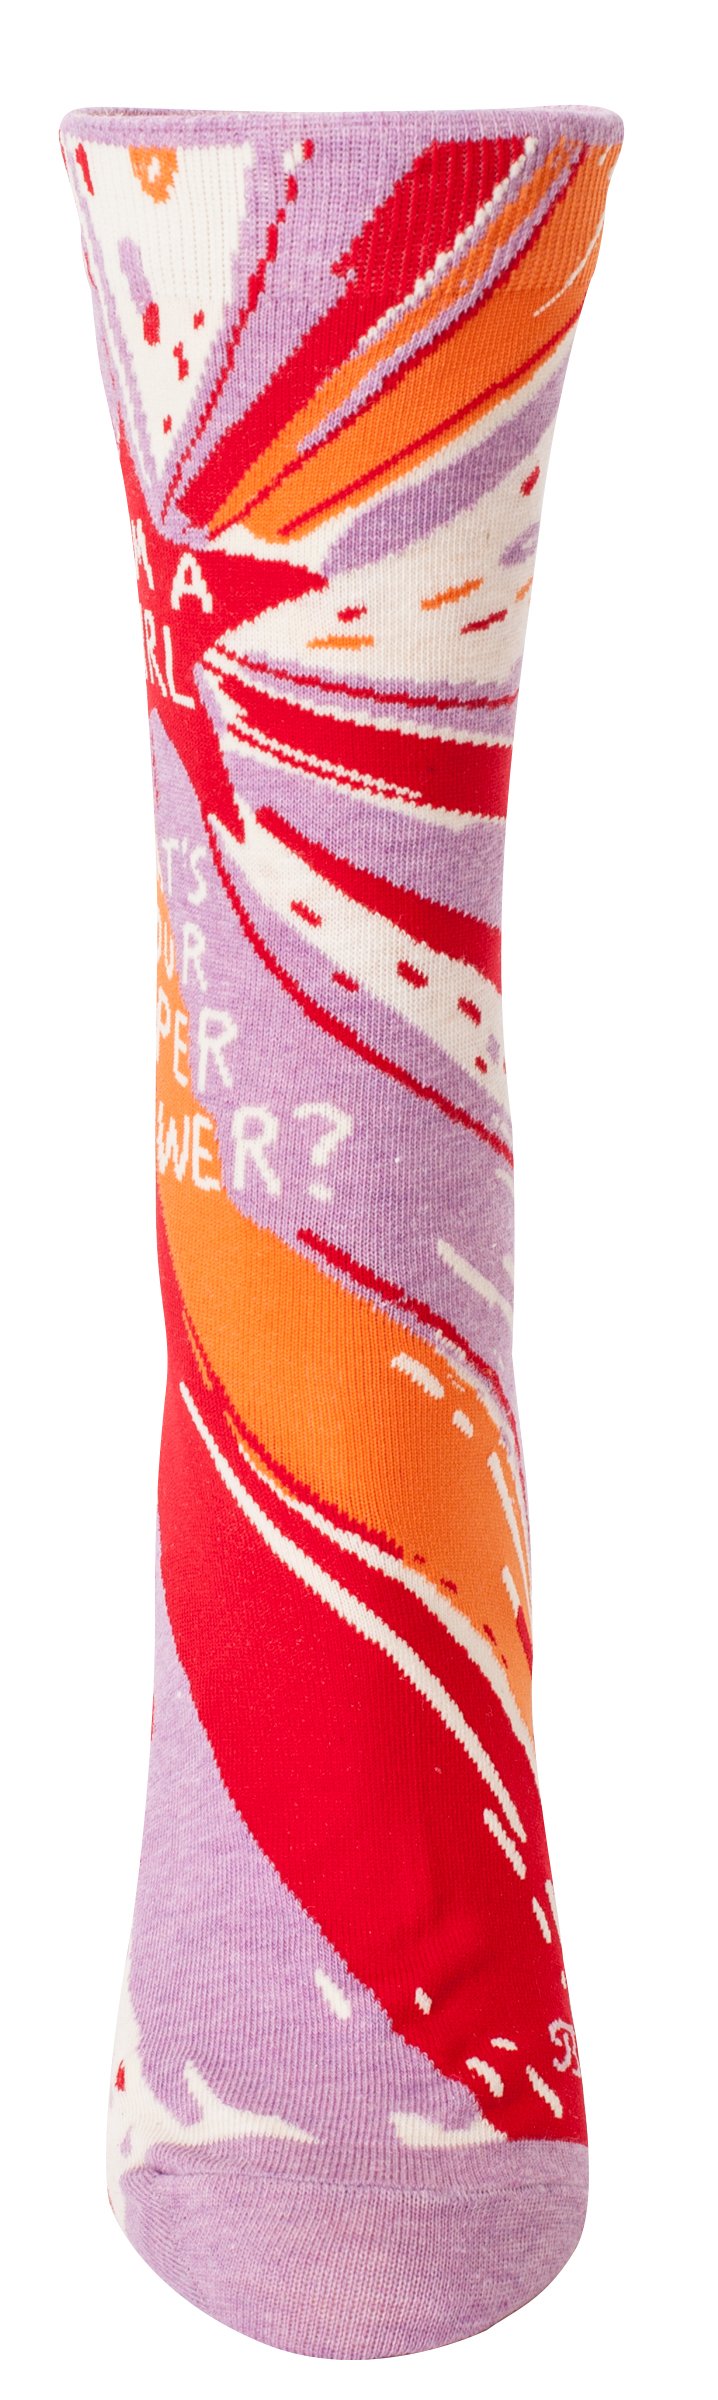 Blue Q - Women's Crew Socks - I'm A Girl, What's Your Superpower?